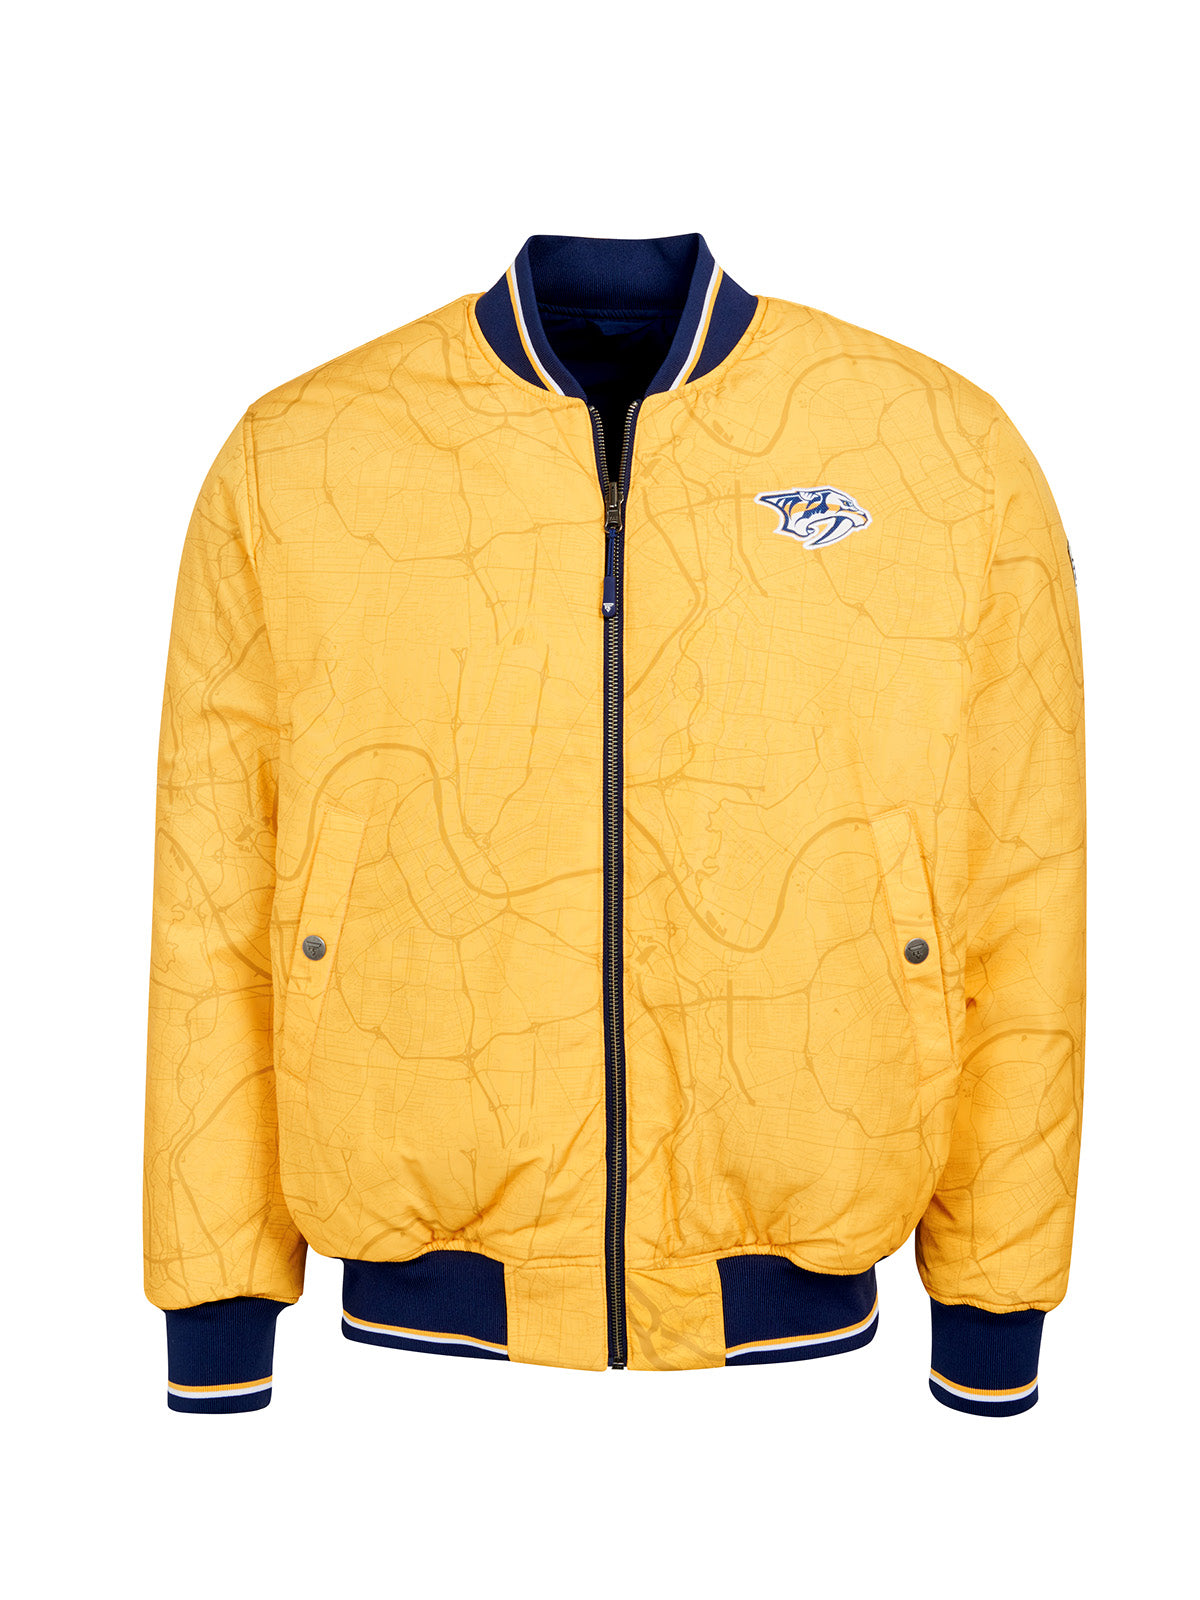 Nashville Predators Bomber - Reversible bomber jacket featuring the iconic Nashville Predators logo with ribbed cuffs, collar and hem in the team colors